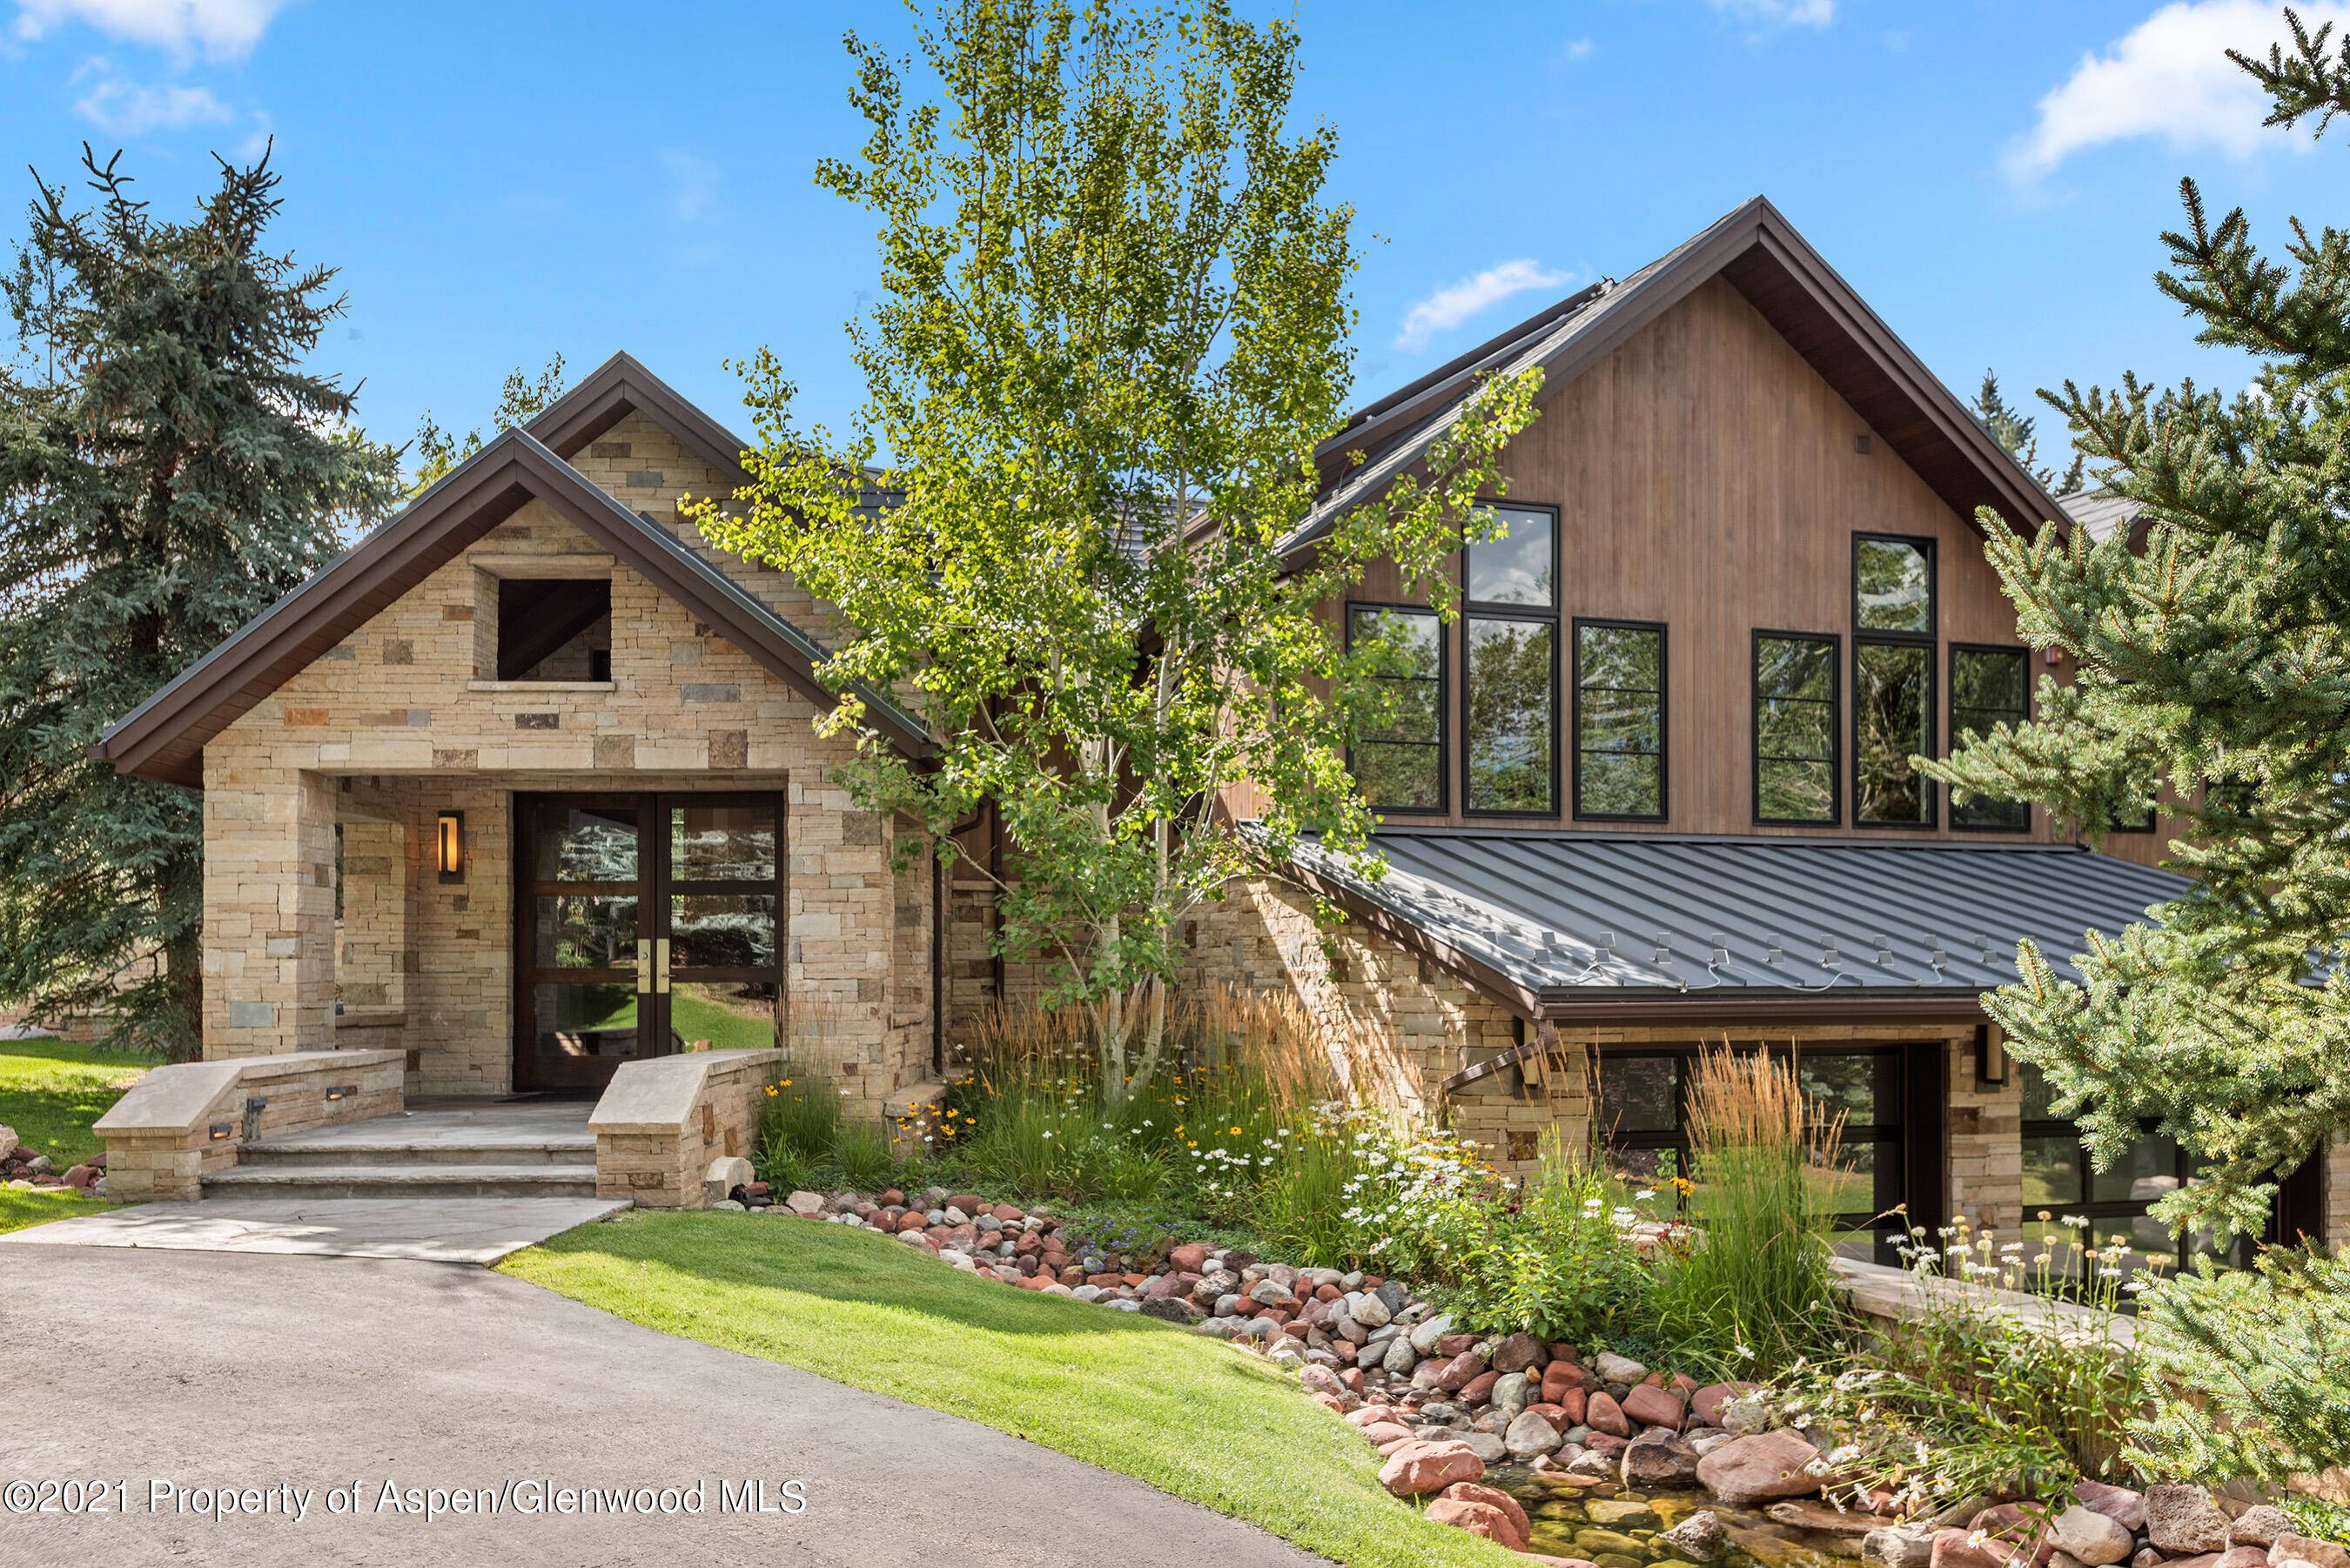 This incredible 5 bedroom 8 bathroom home is the perfect summer retreat for your family.